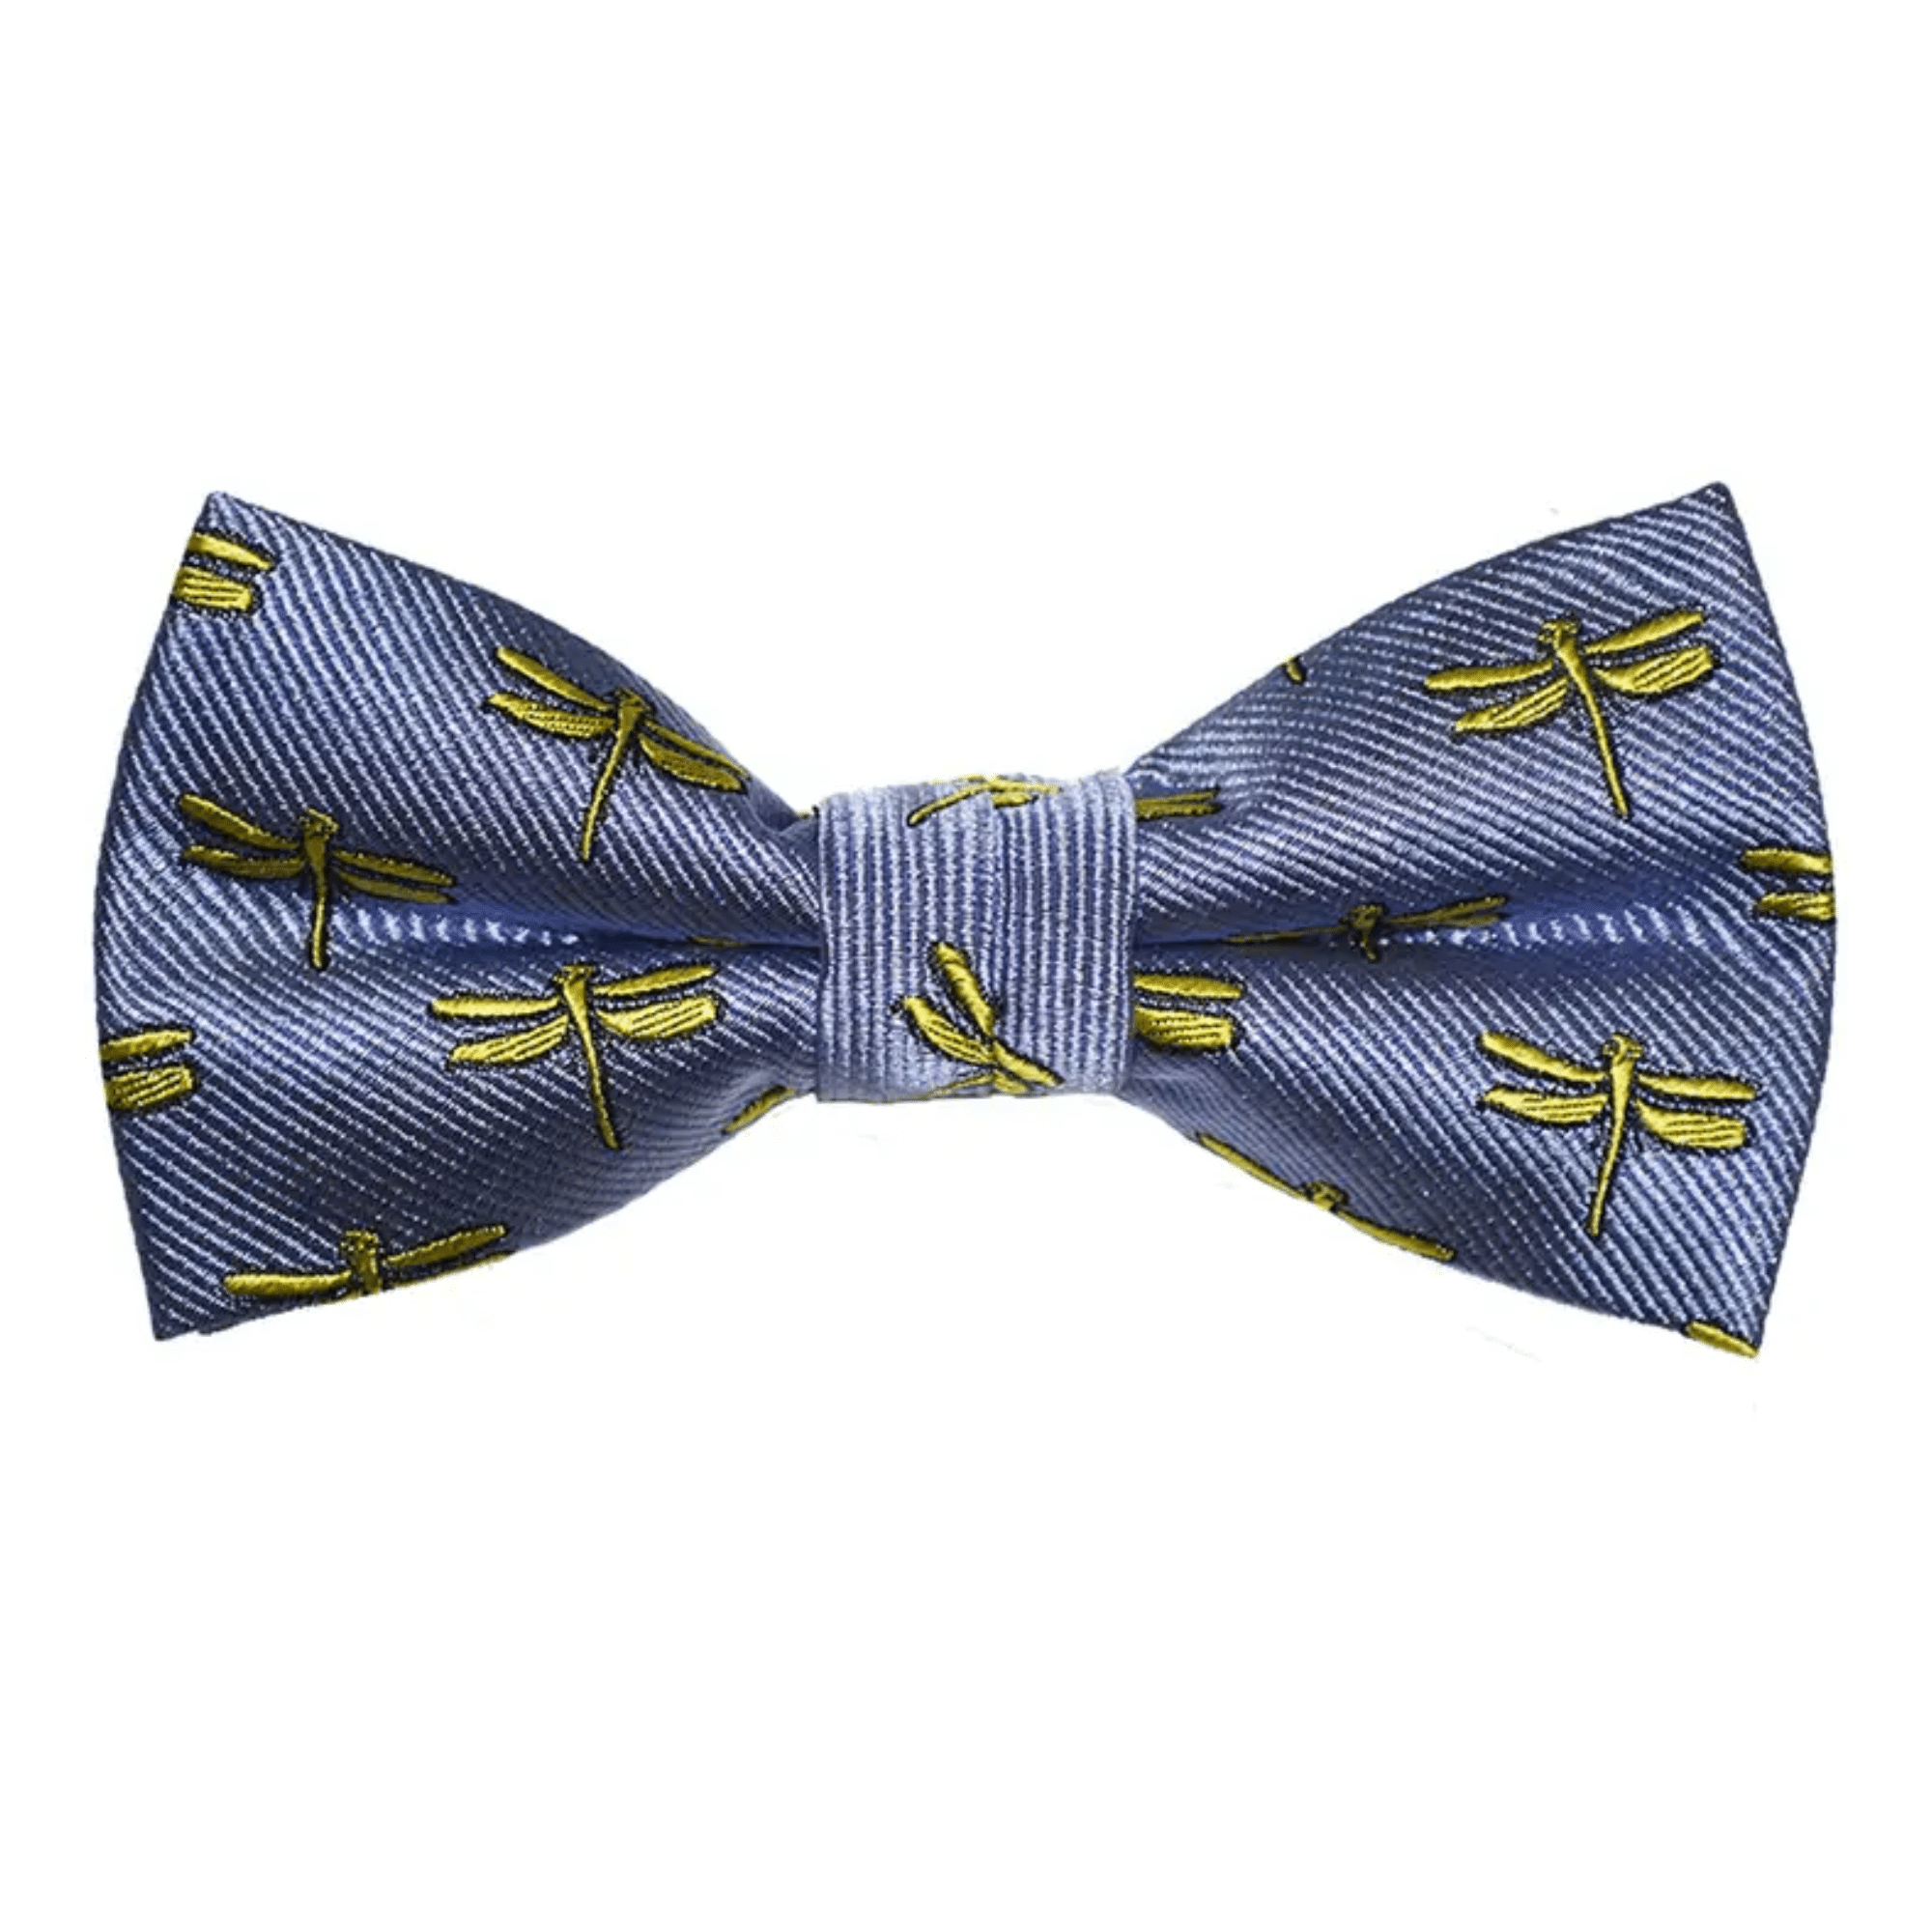 Dragonfly Bow Tie - Yellow On Gray, Woven Silk, Pre-Tied For Kids